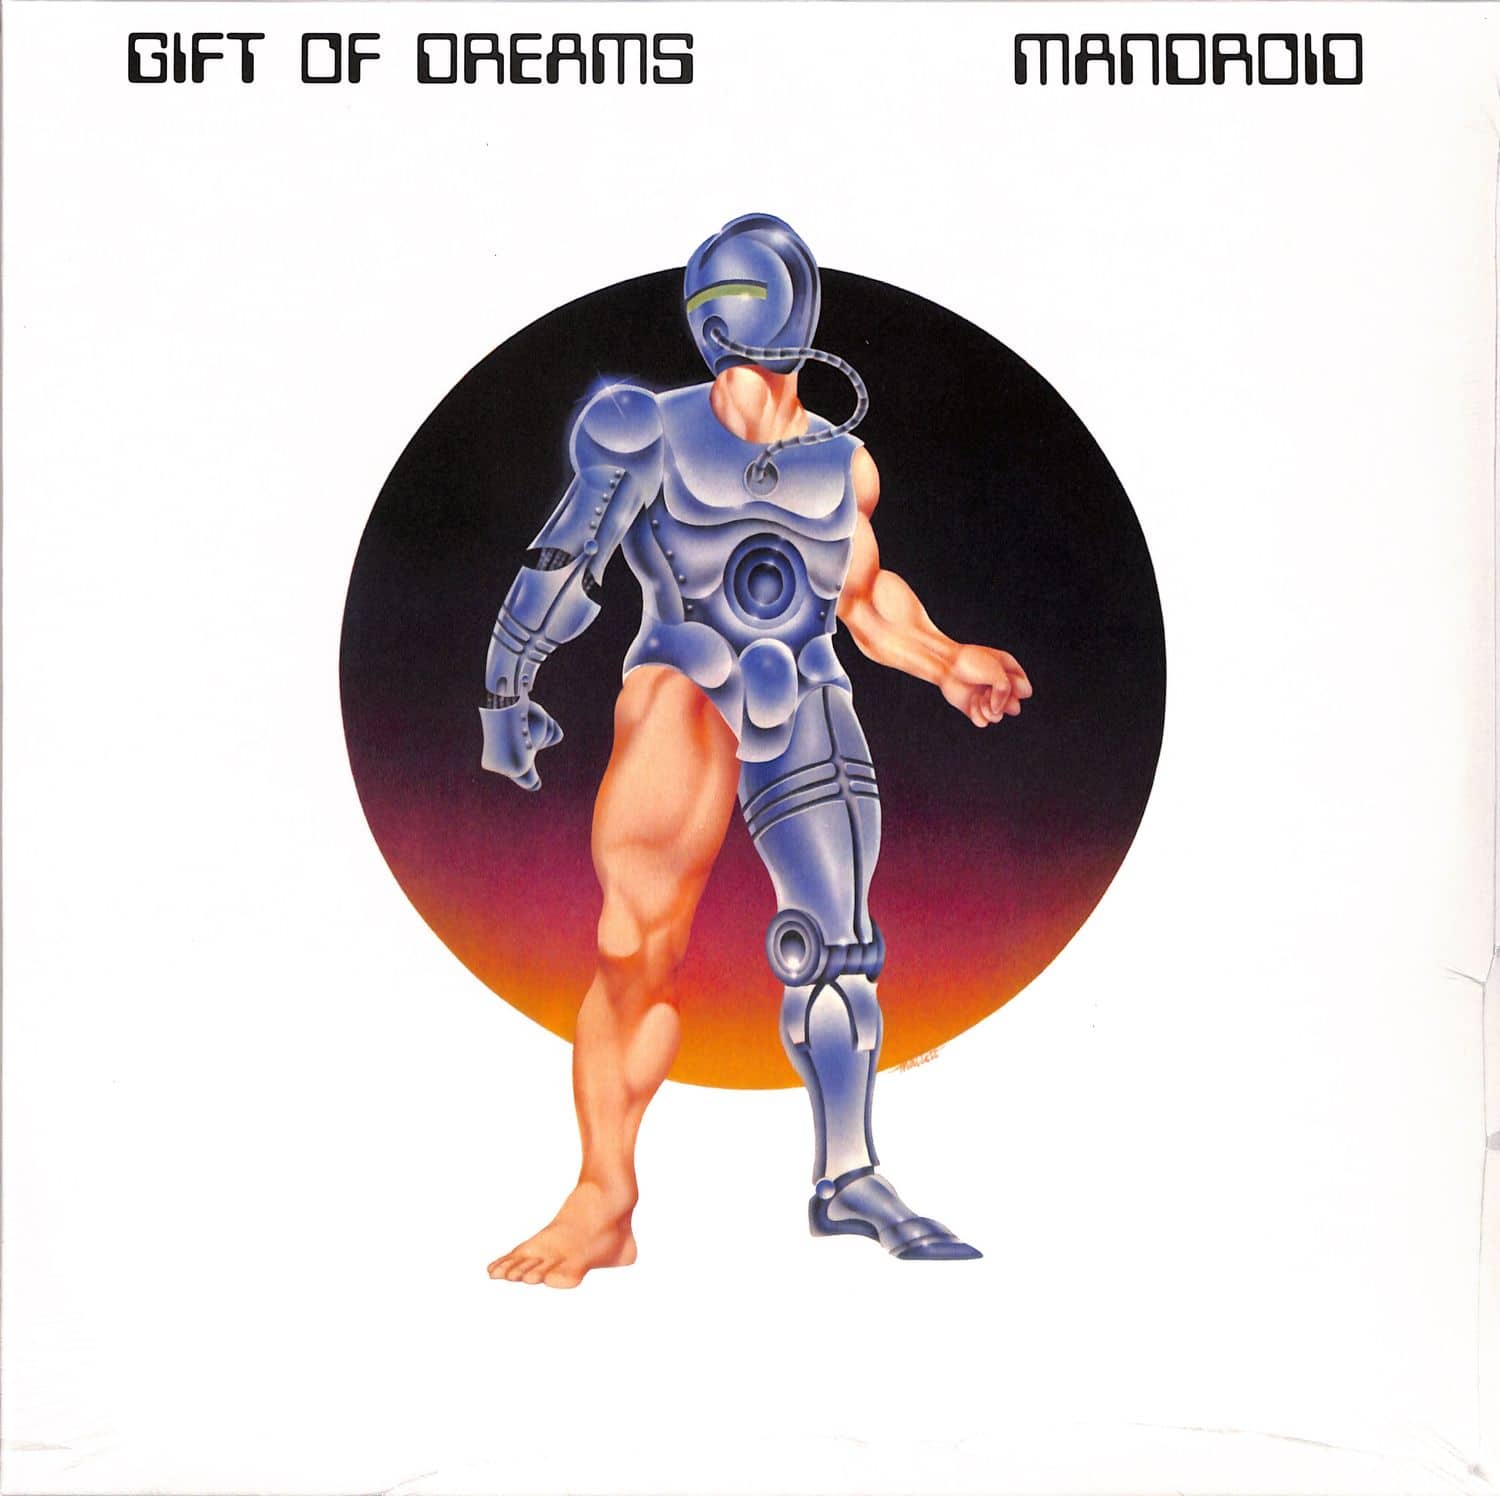 Gift Of Dreams - MANDROID 